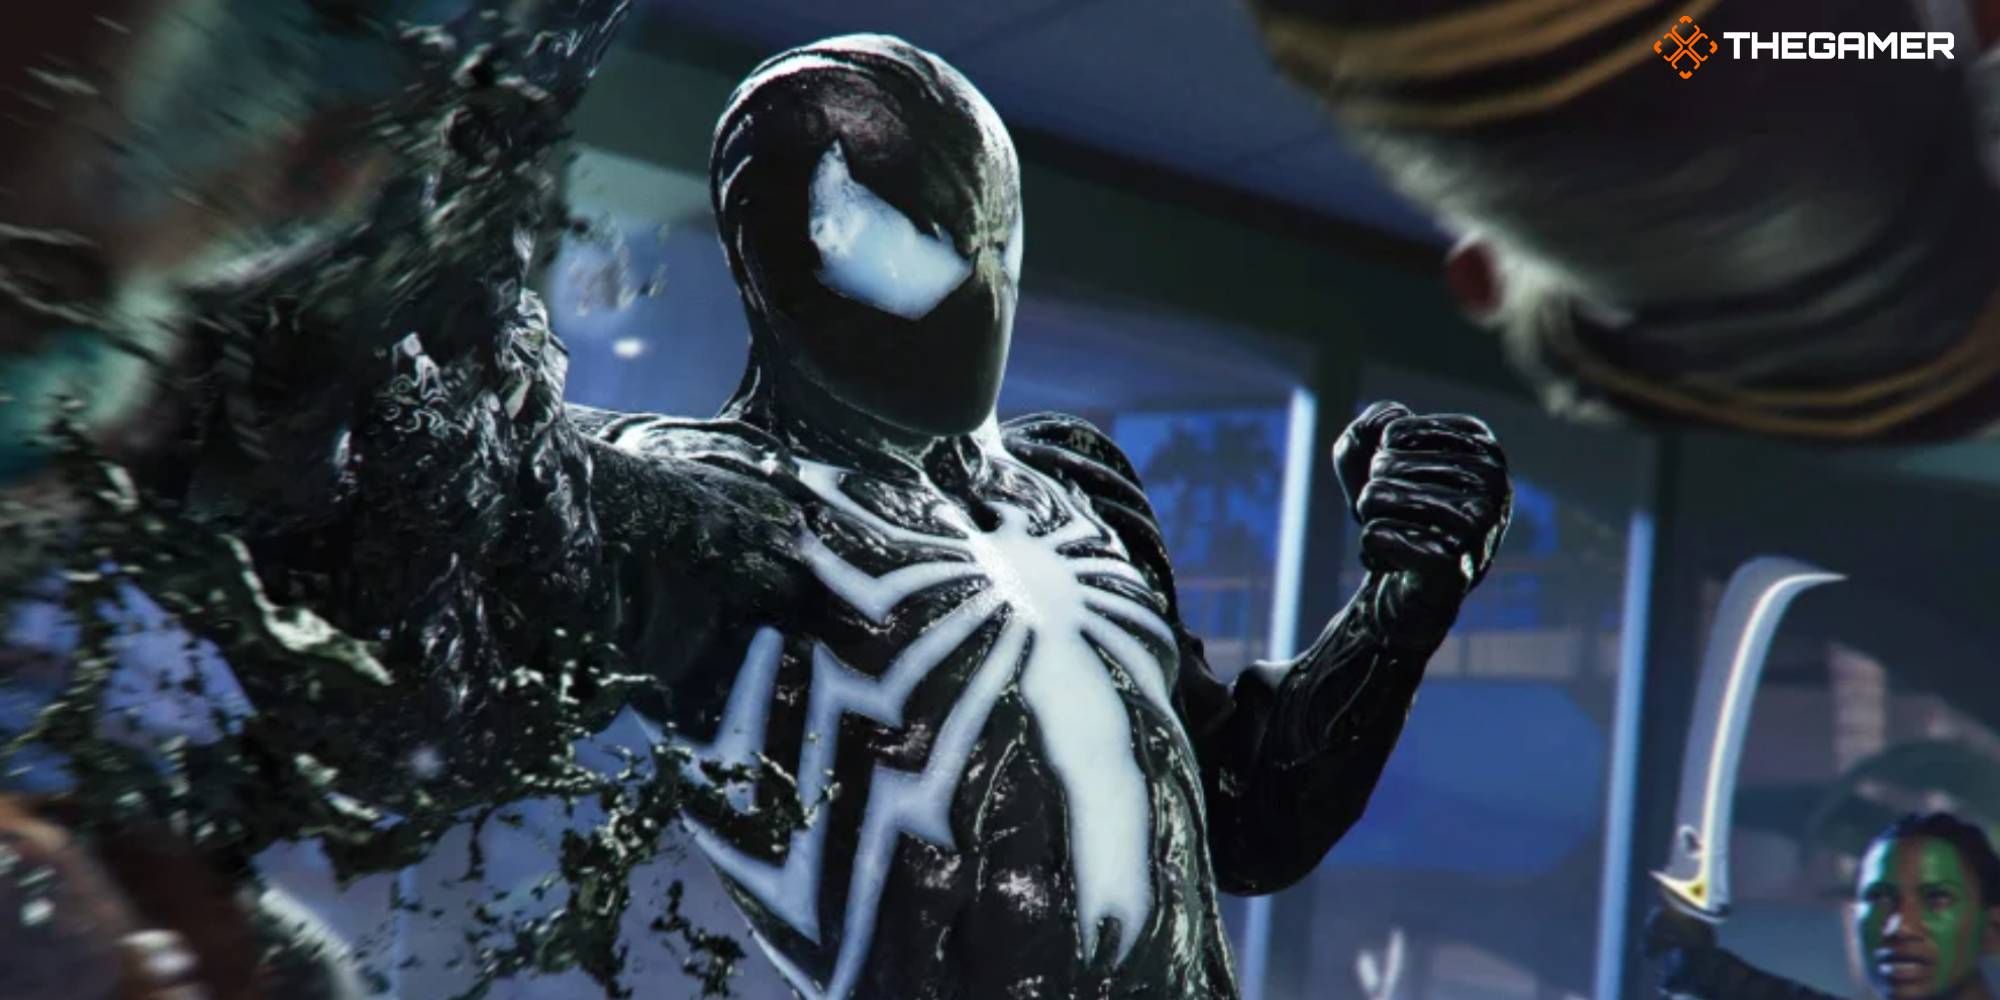 Peter in Symbiote Form in Spider-Man 2